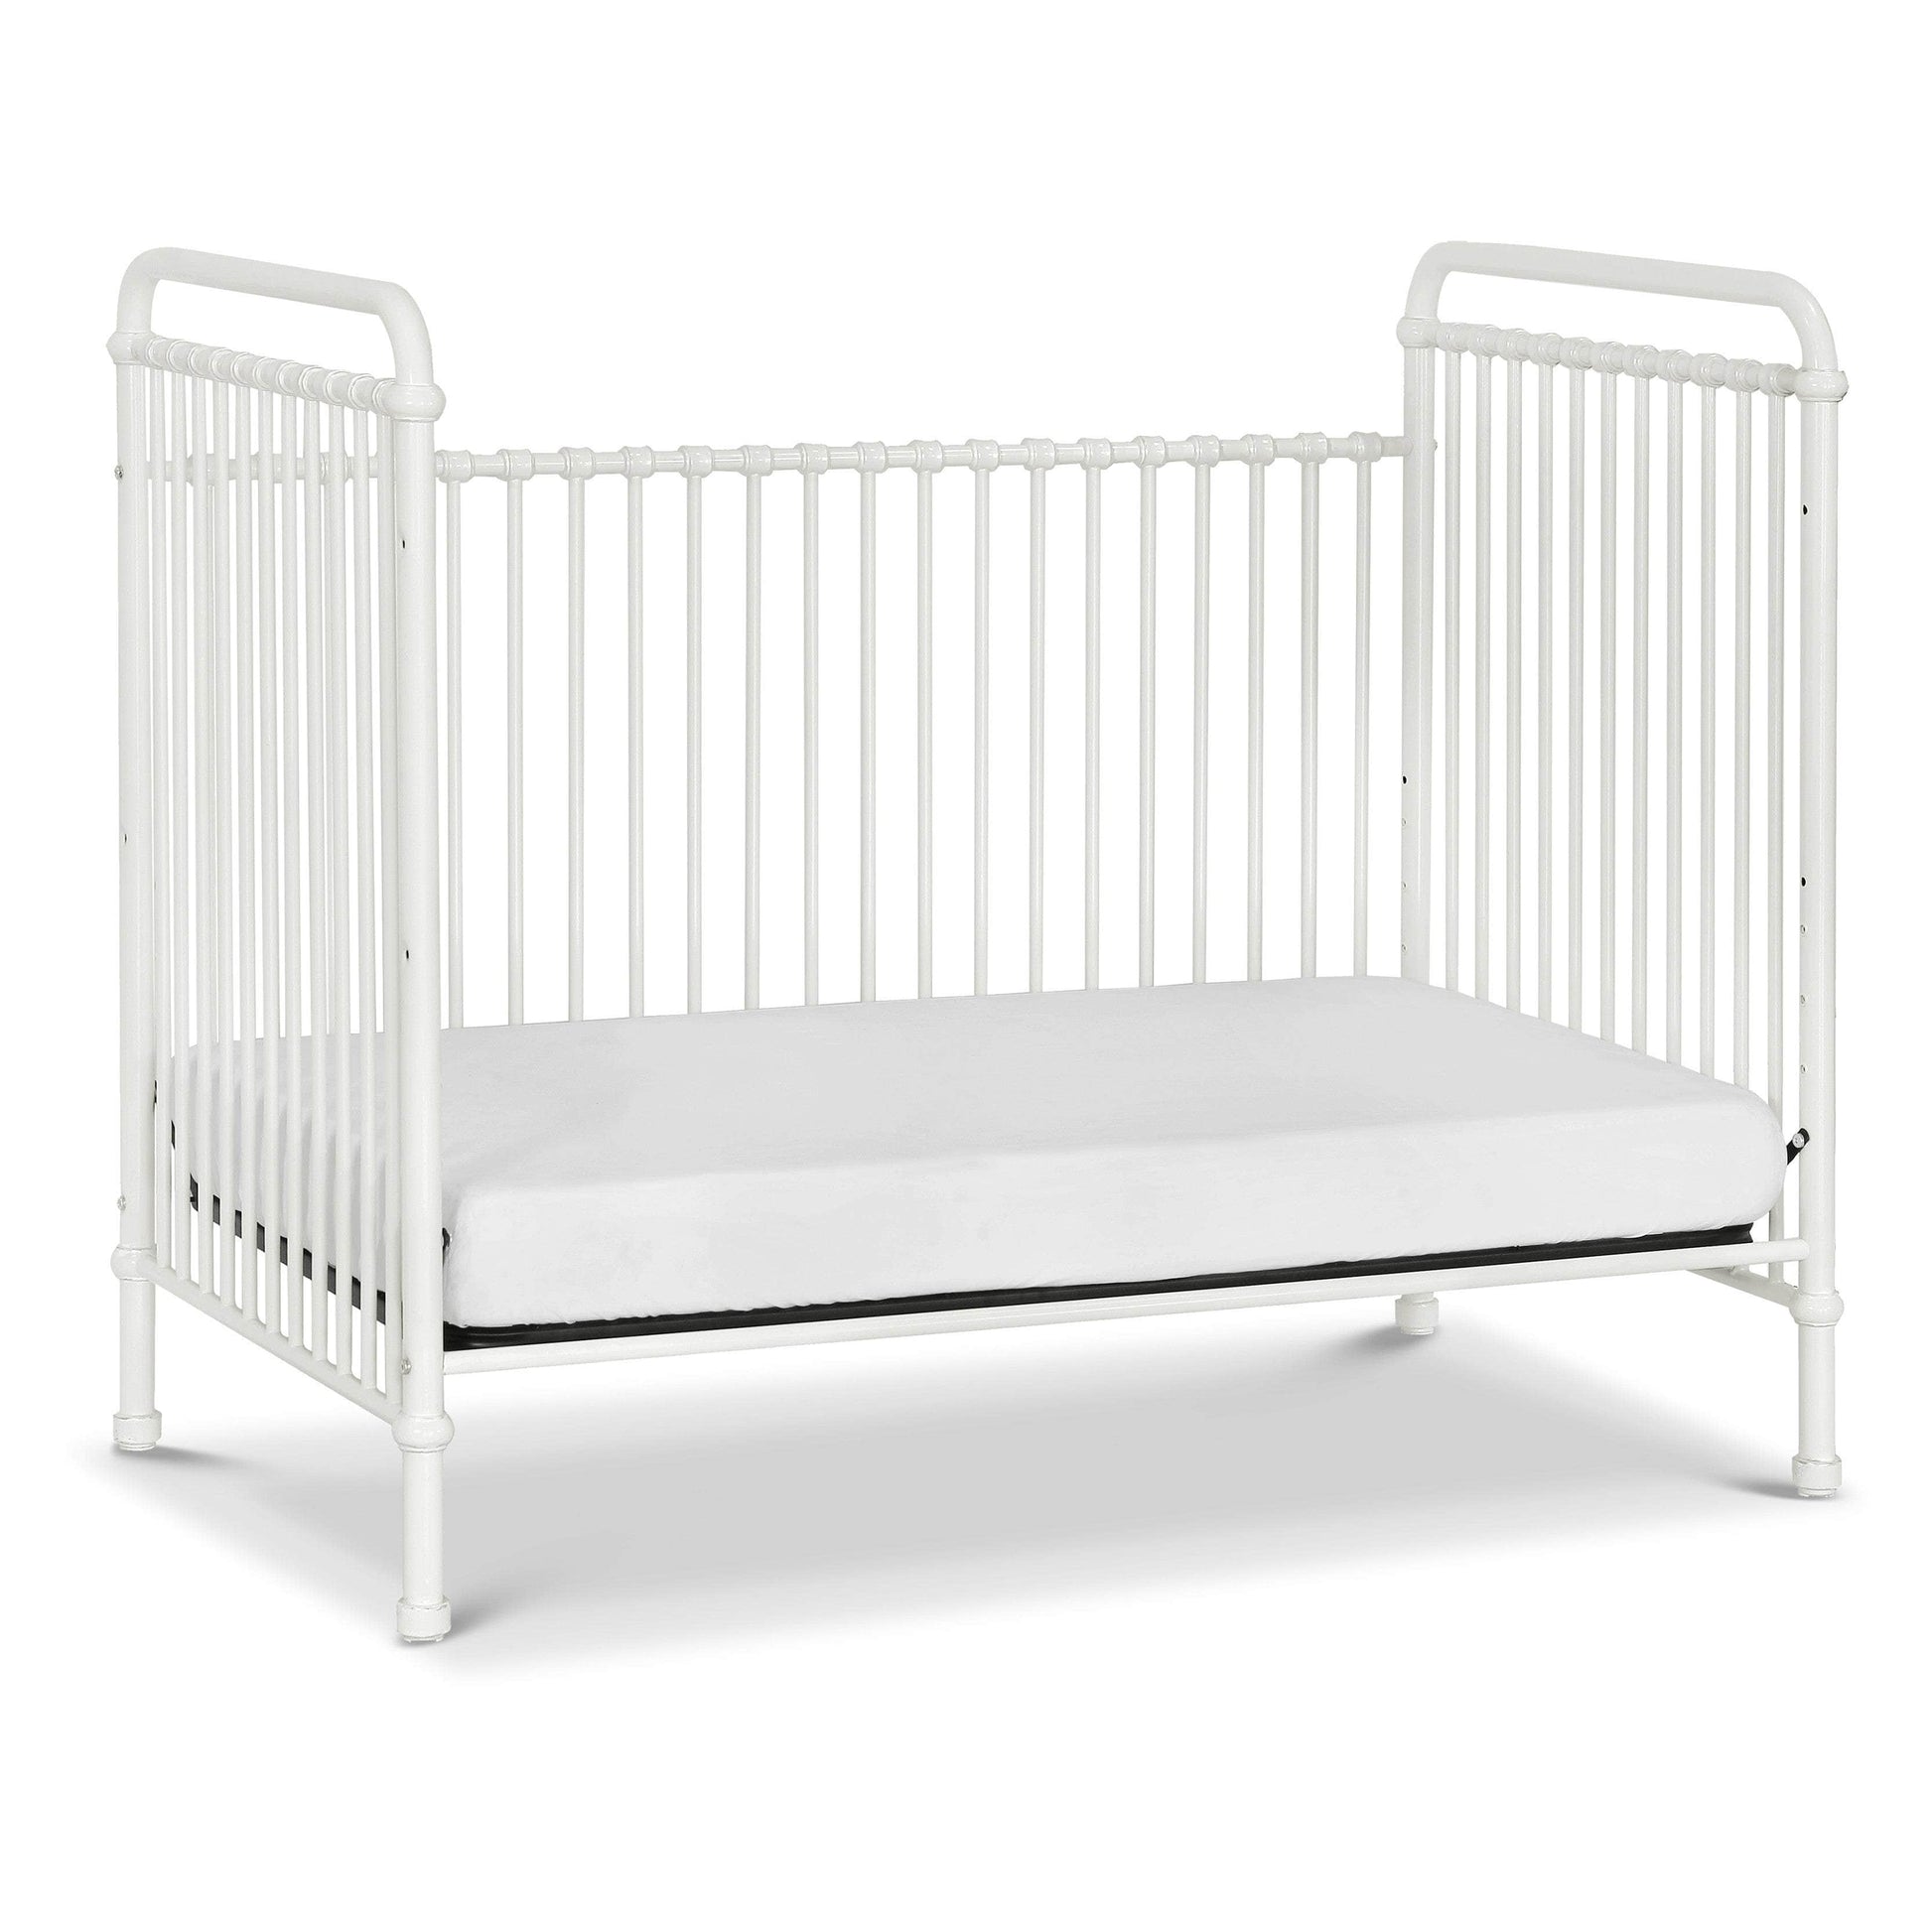 B15501WX,Abigail 3-in-1 Convertible Crib in Washed White